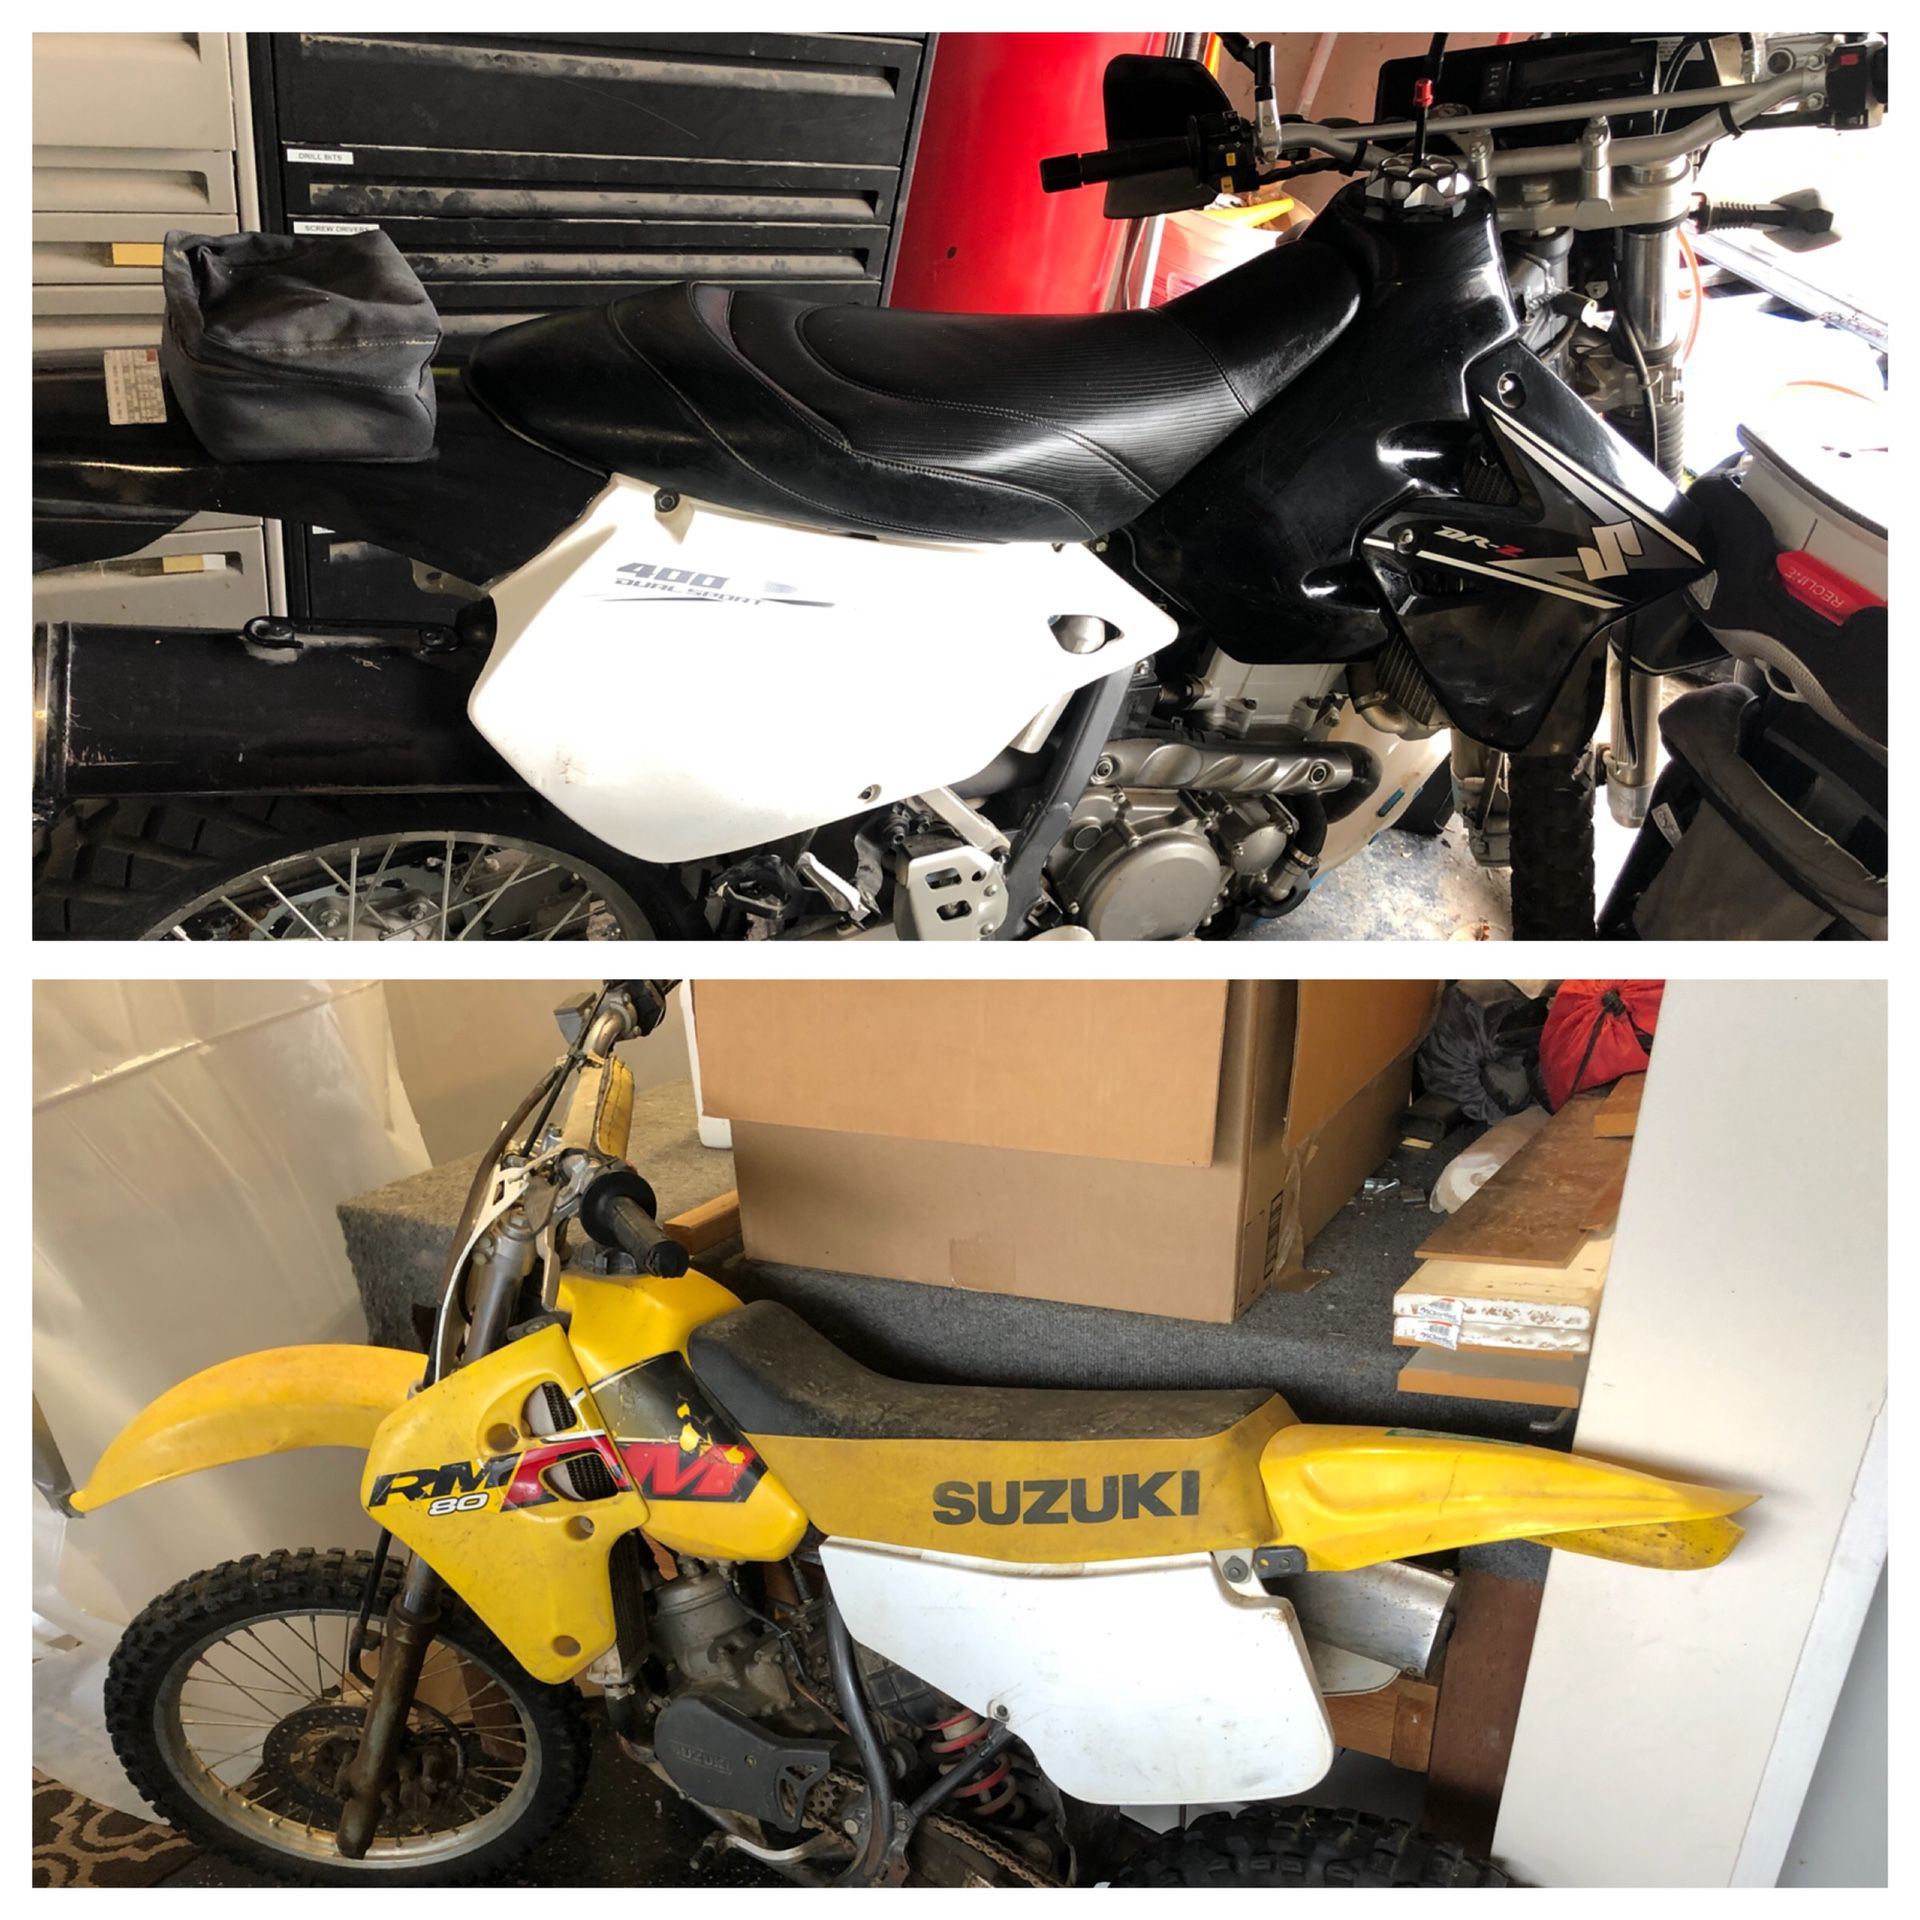 2 Suzuki motorcycles for the price of 1